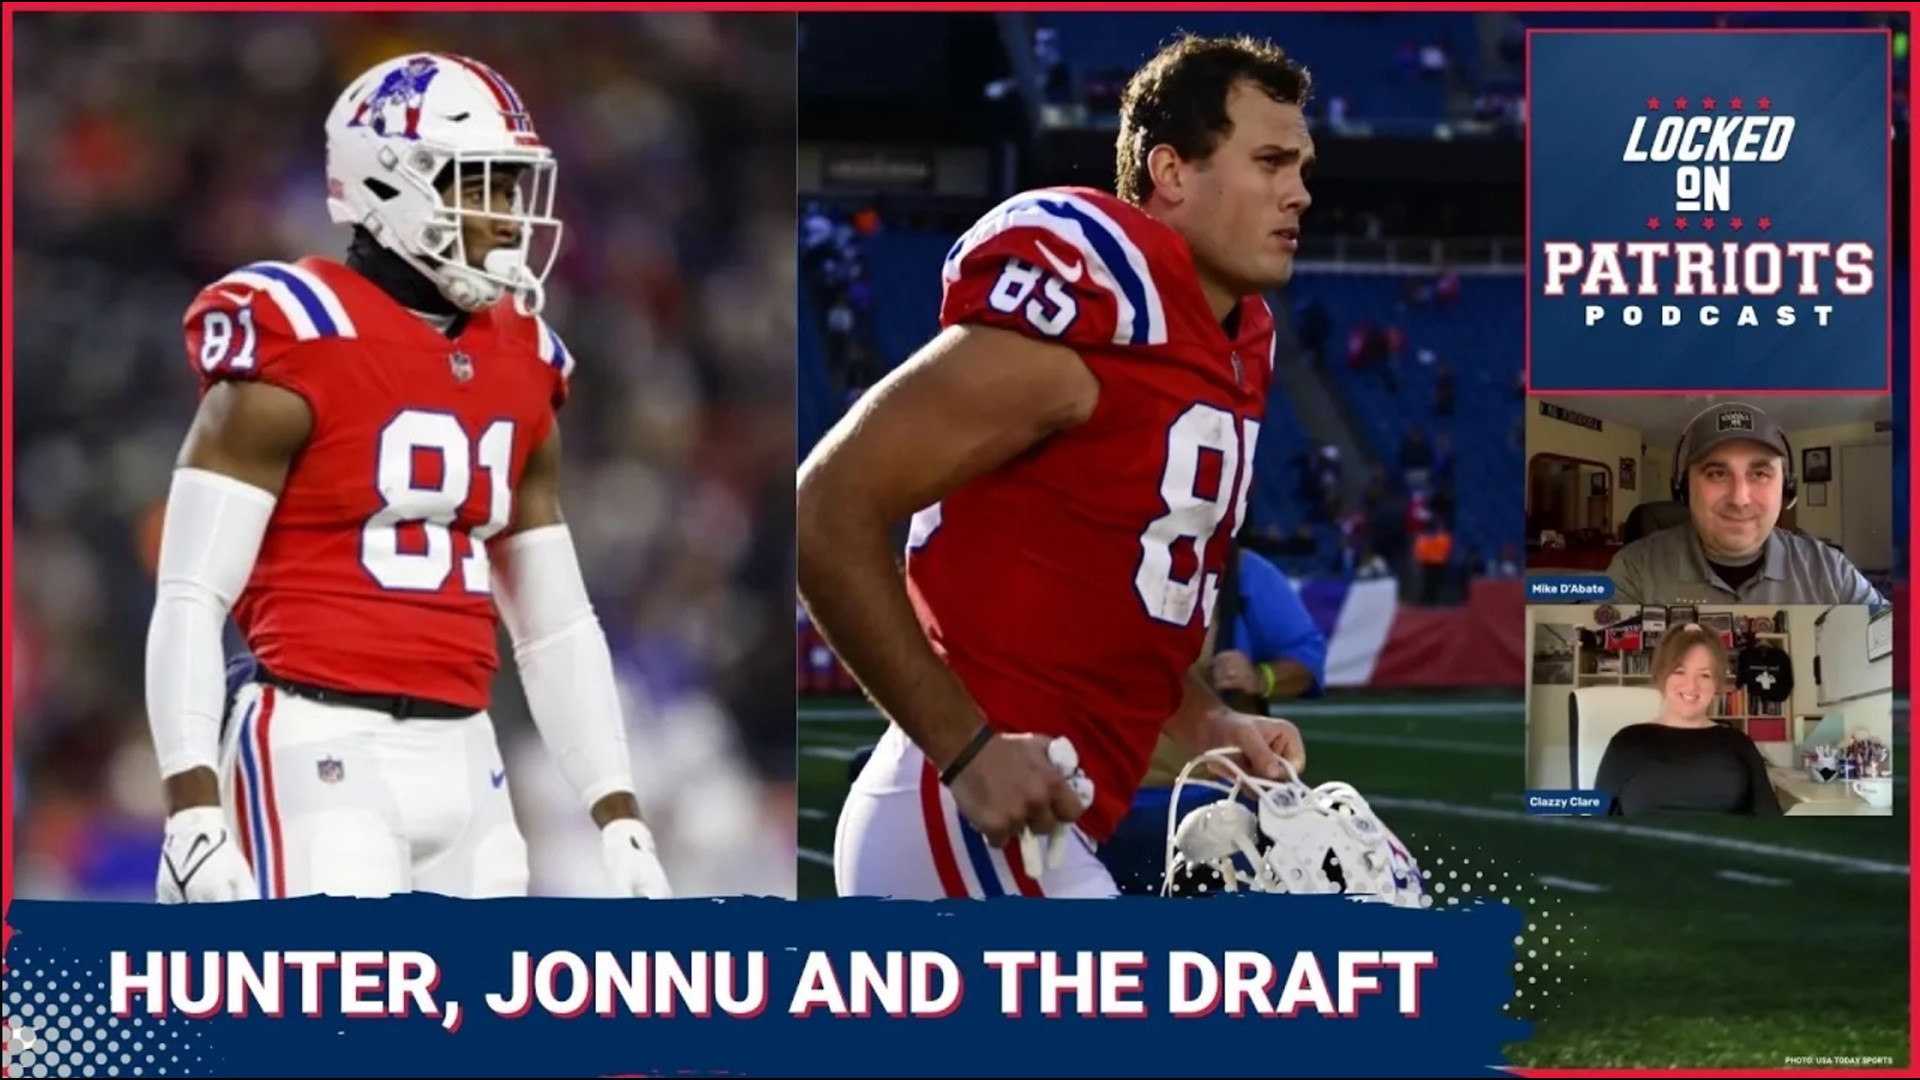 While the tight end position is not among the New England Patriots most pressing needs, the depth of the 2023 NFL Draft class may tempt them into making a selection.